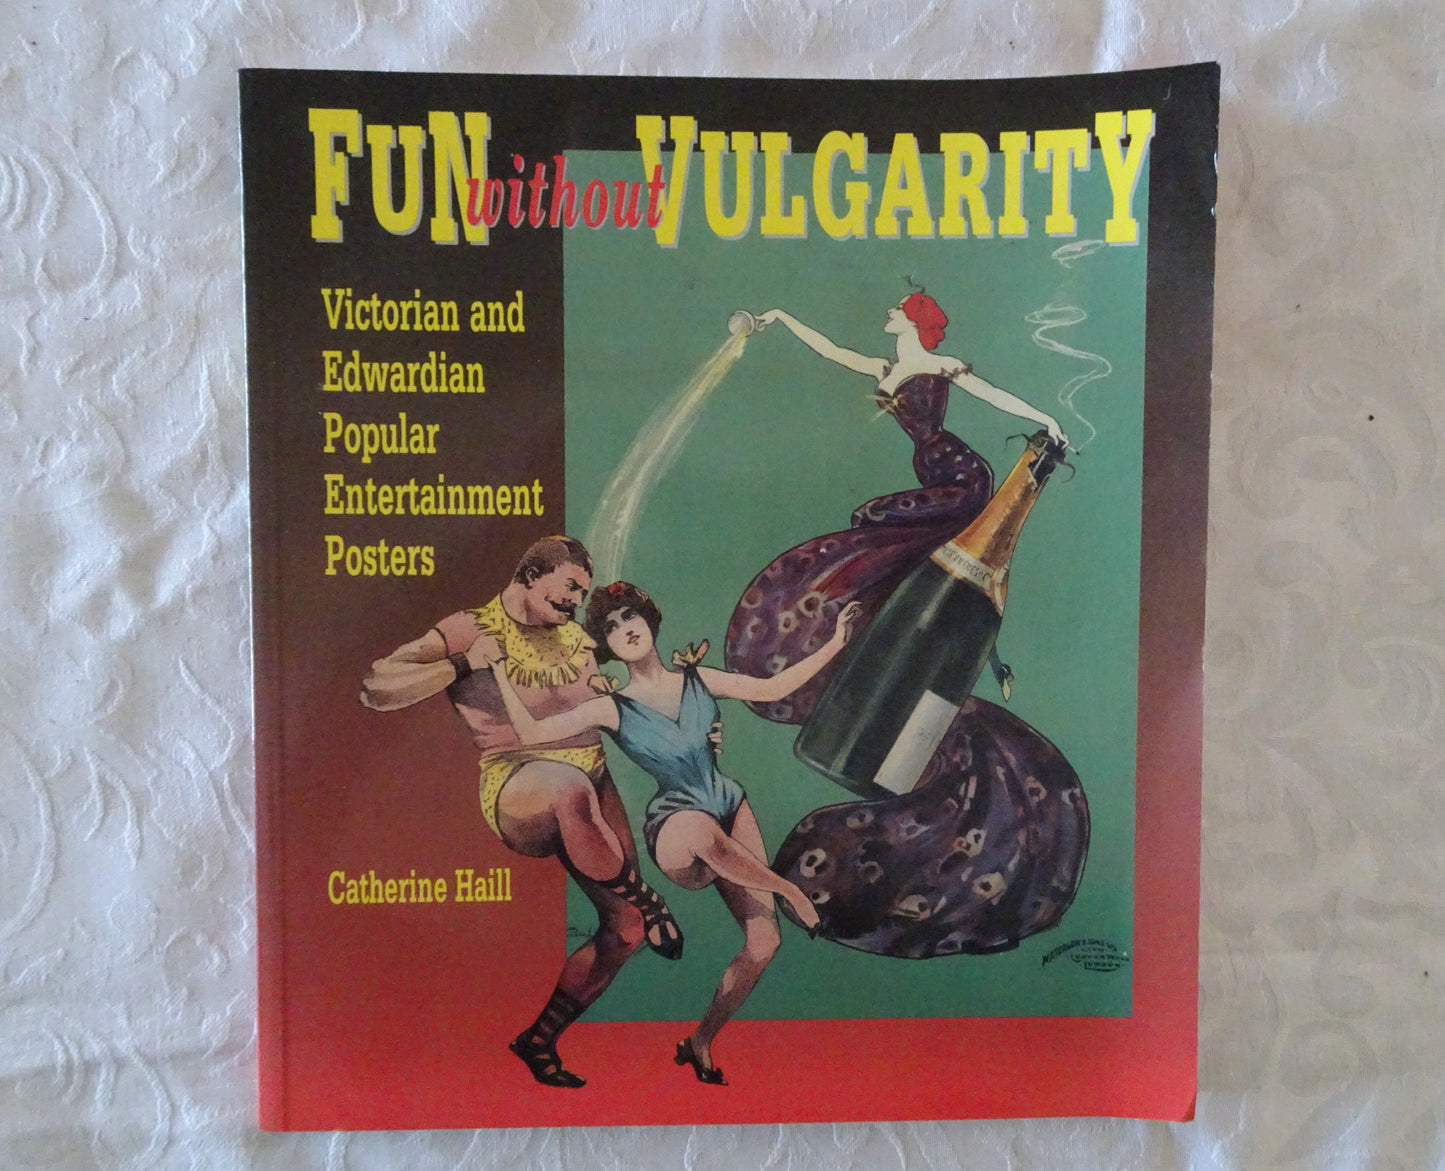 Fun Without Vulgarity by Catherine Haill